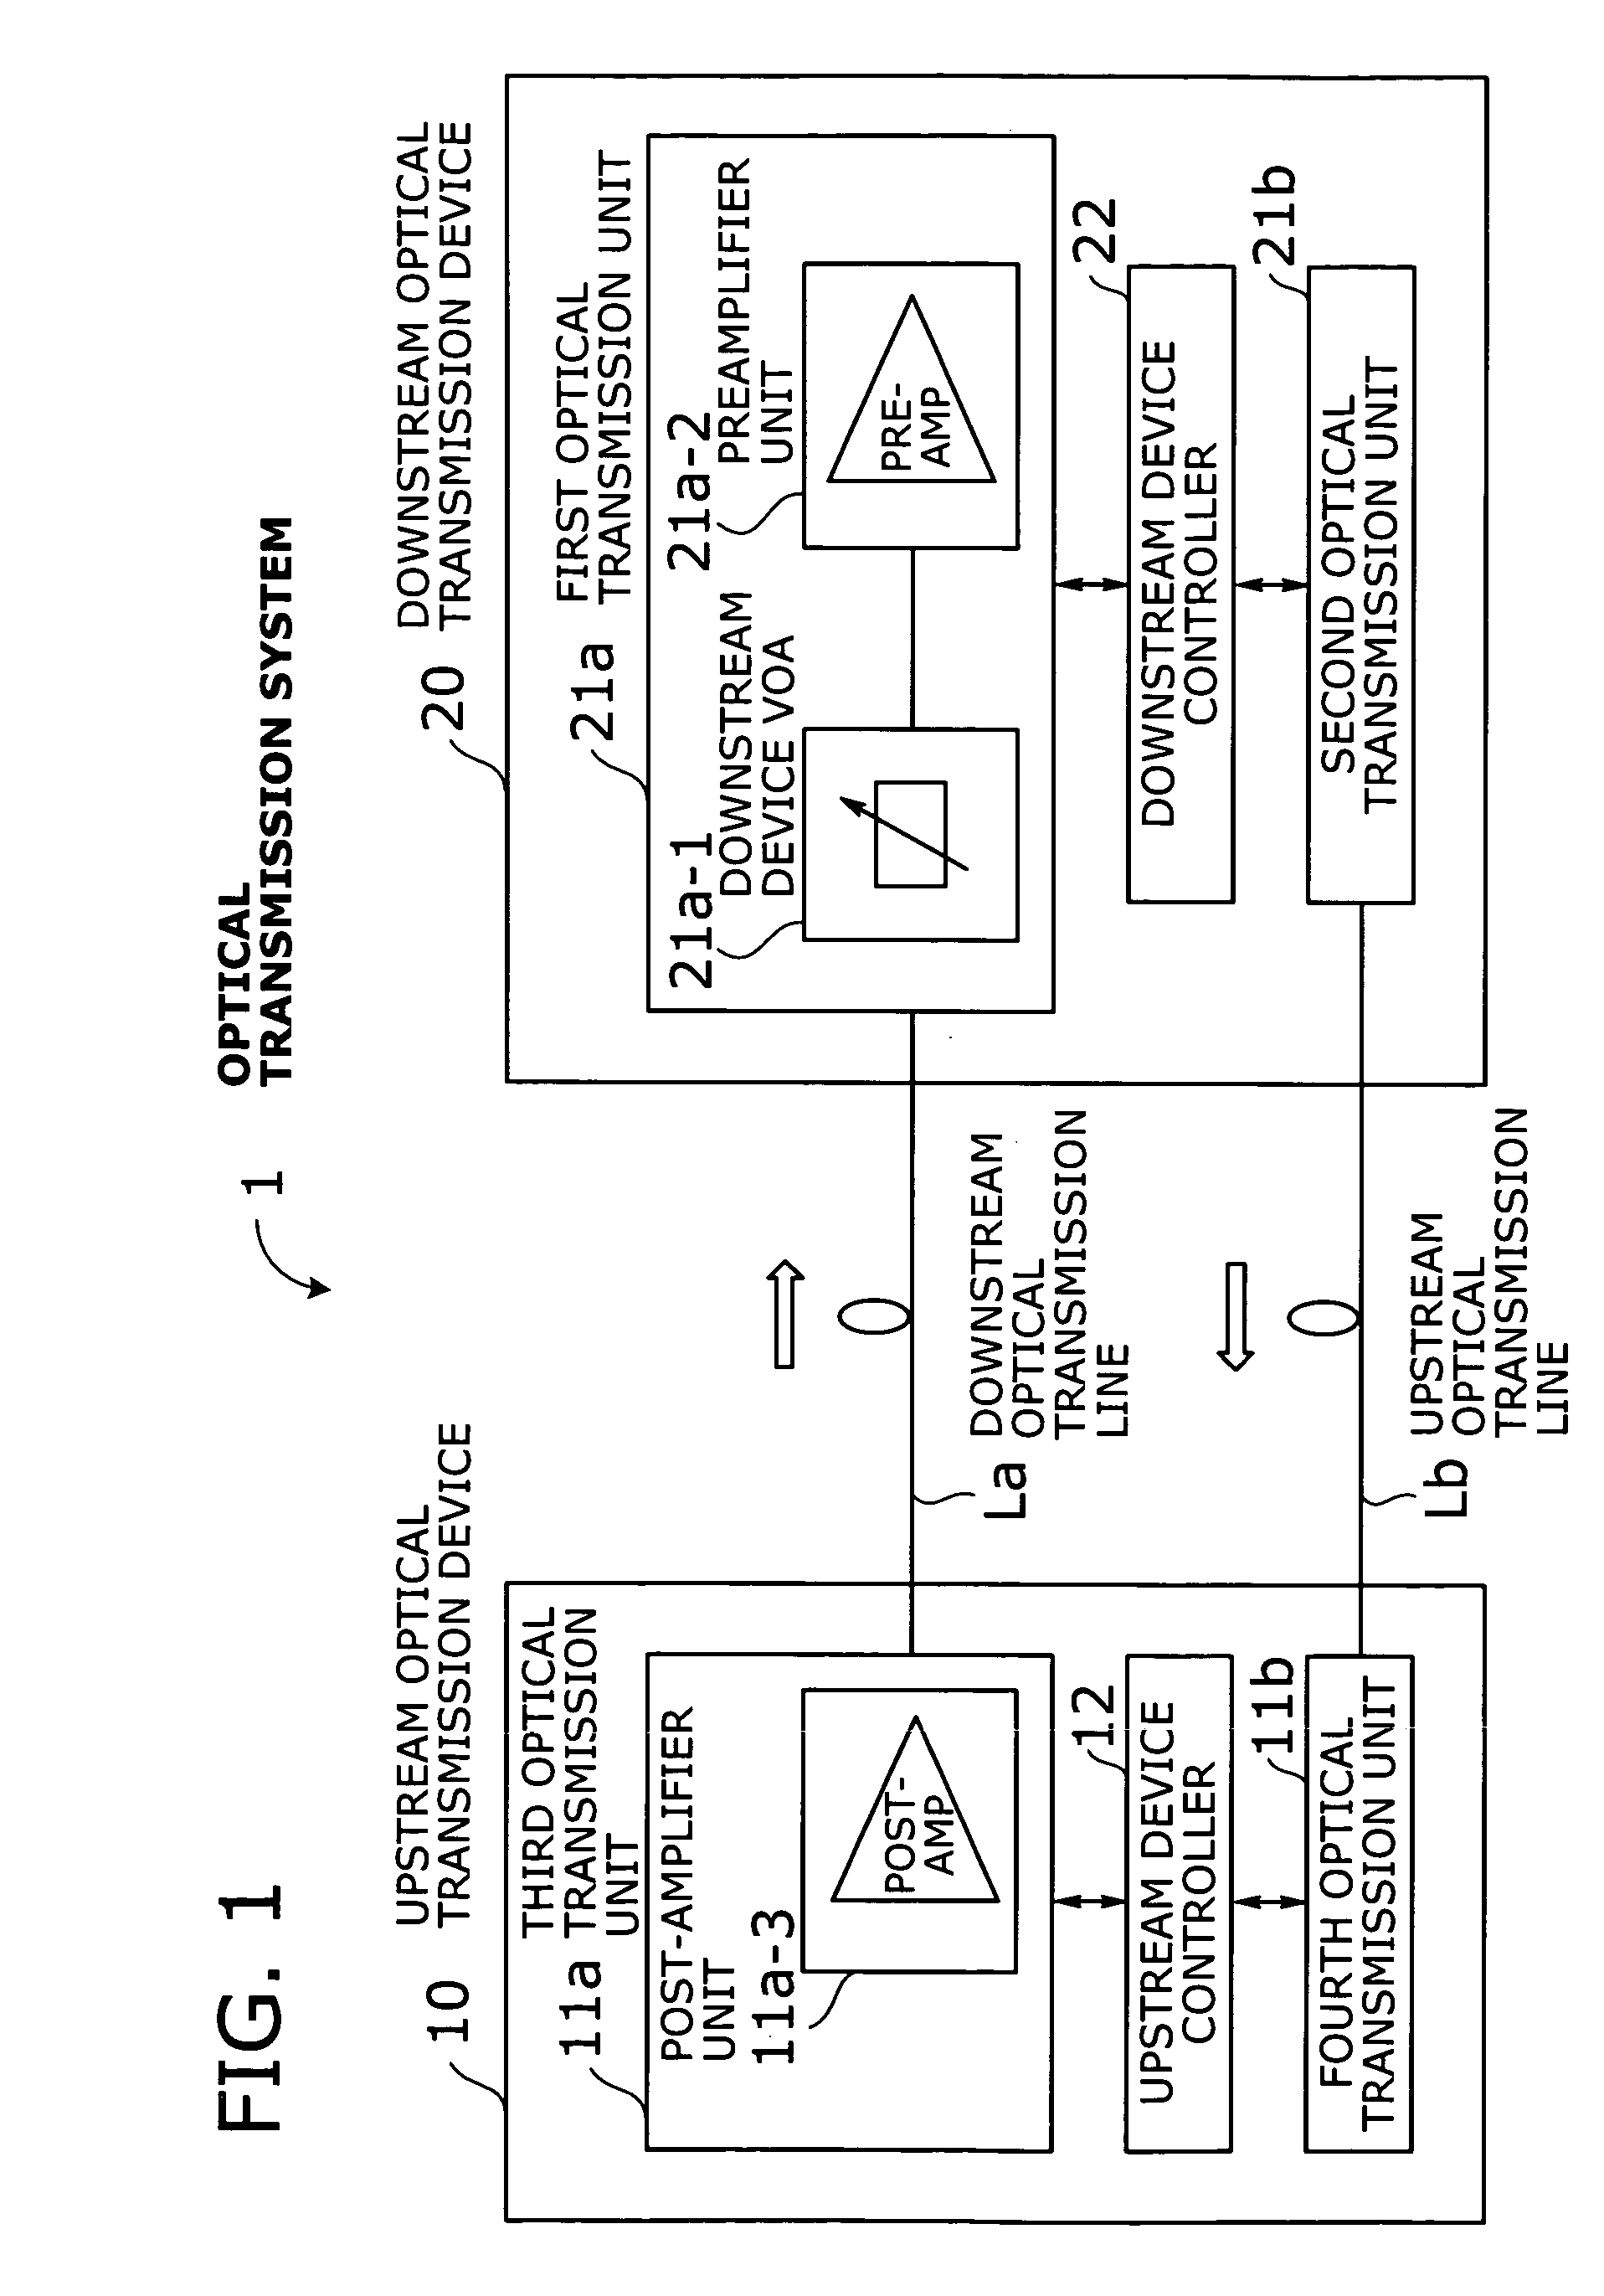 Optical transmission system with automatic signal level adjustment and startup functions